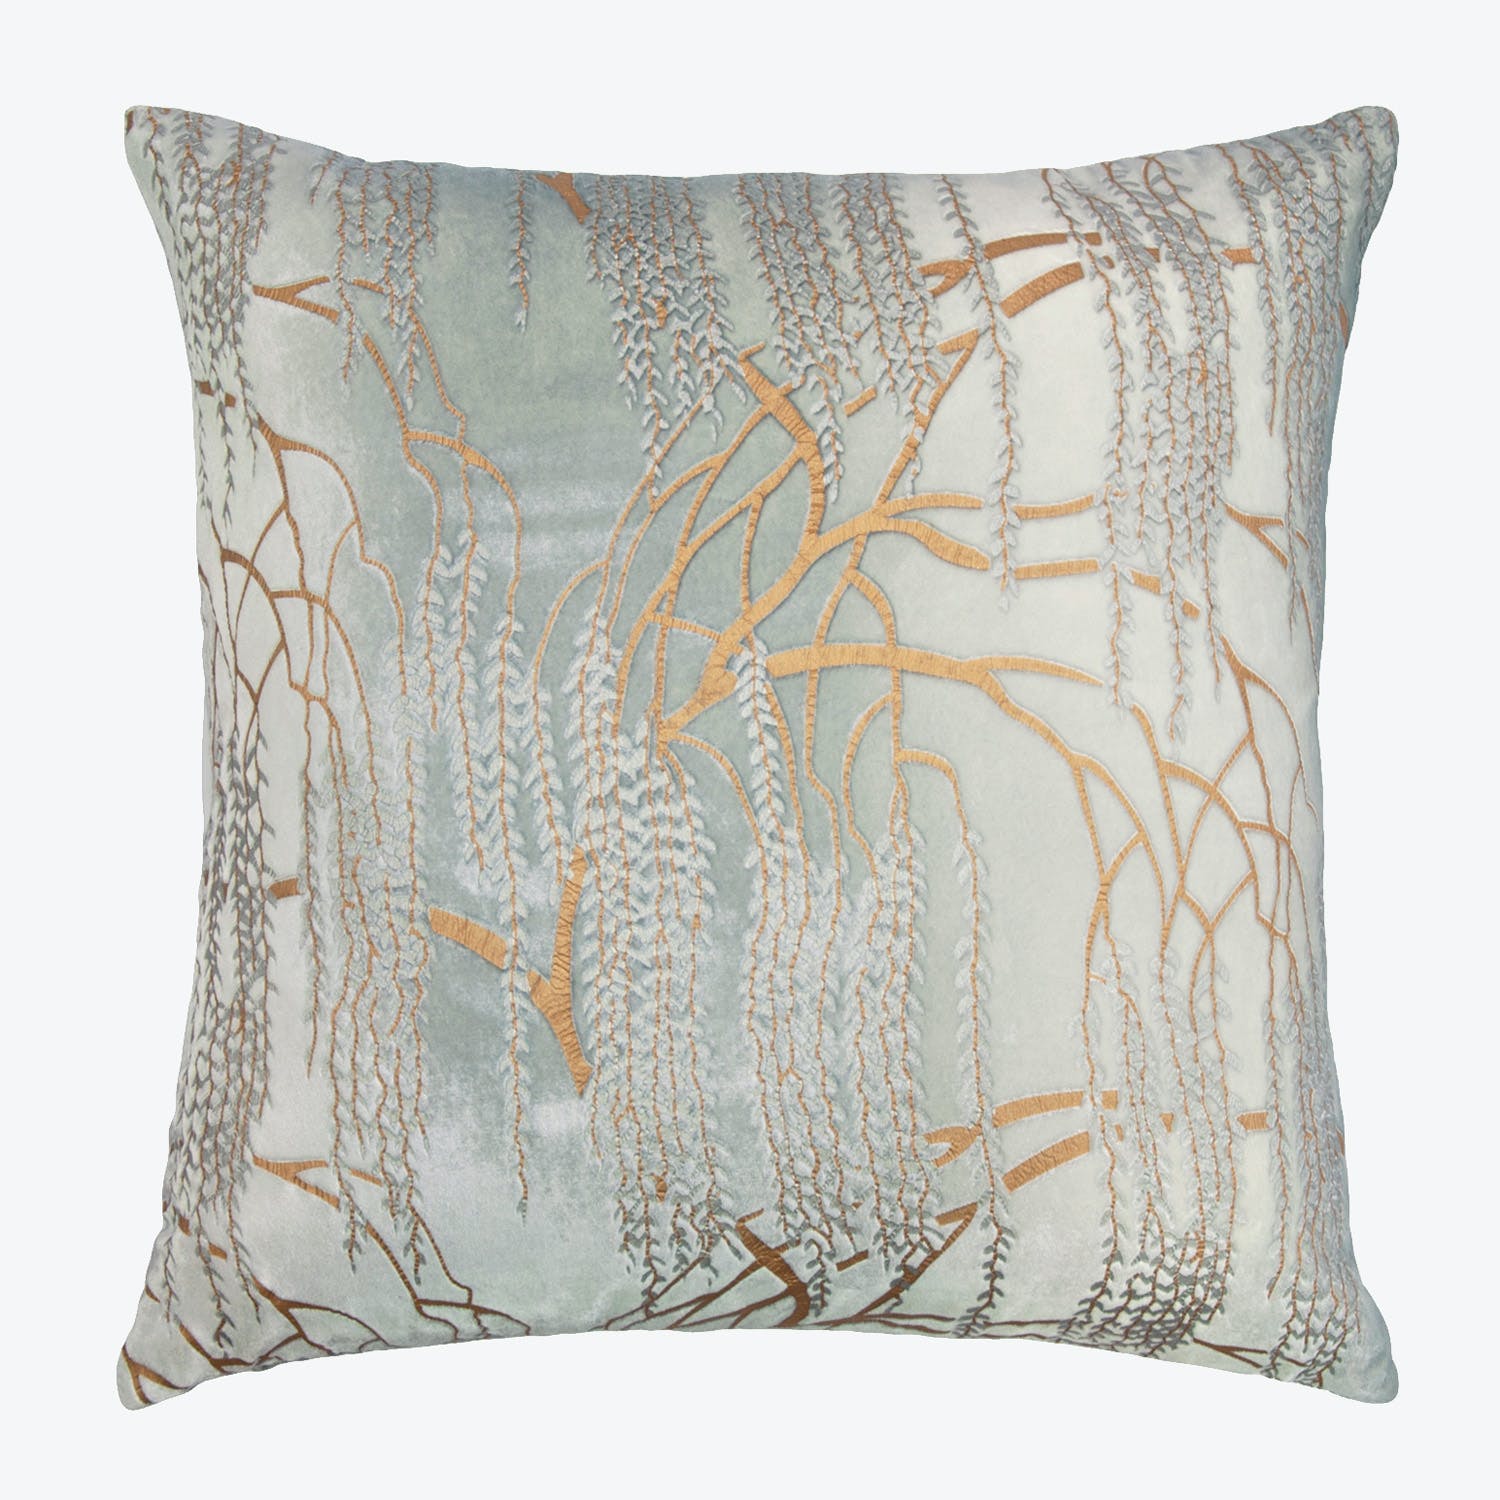 Intricately designed square decorative pillow with calming tree branch pattern.